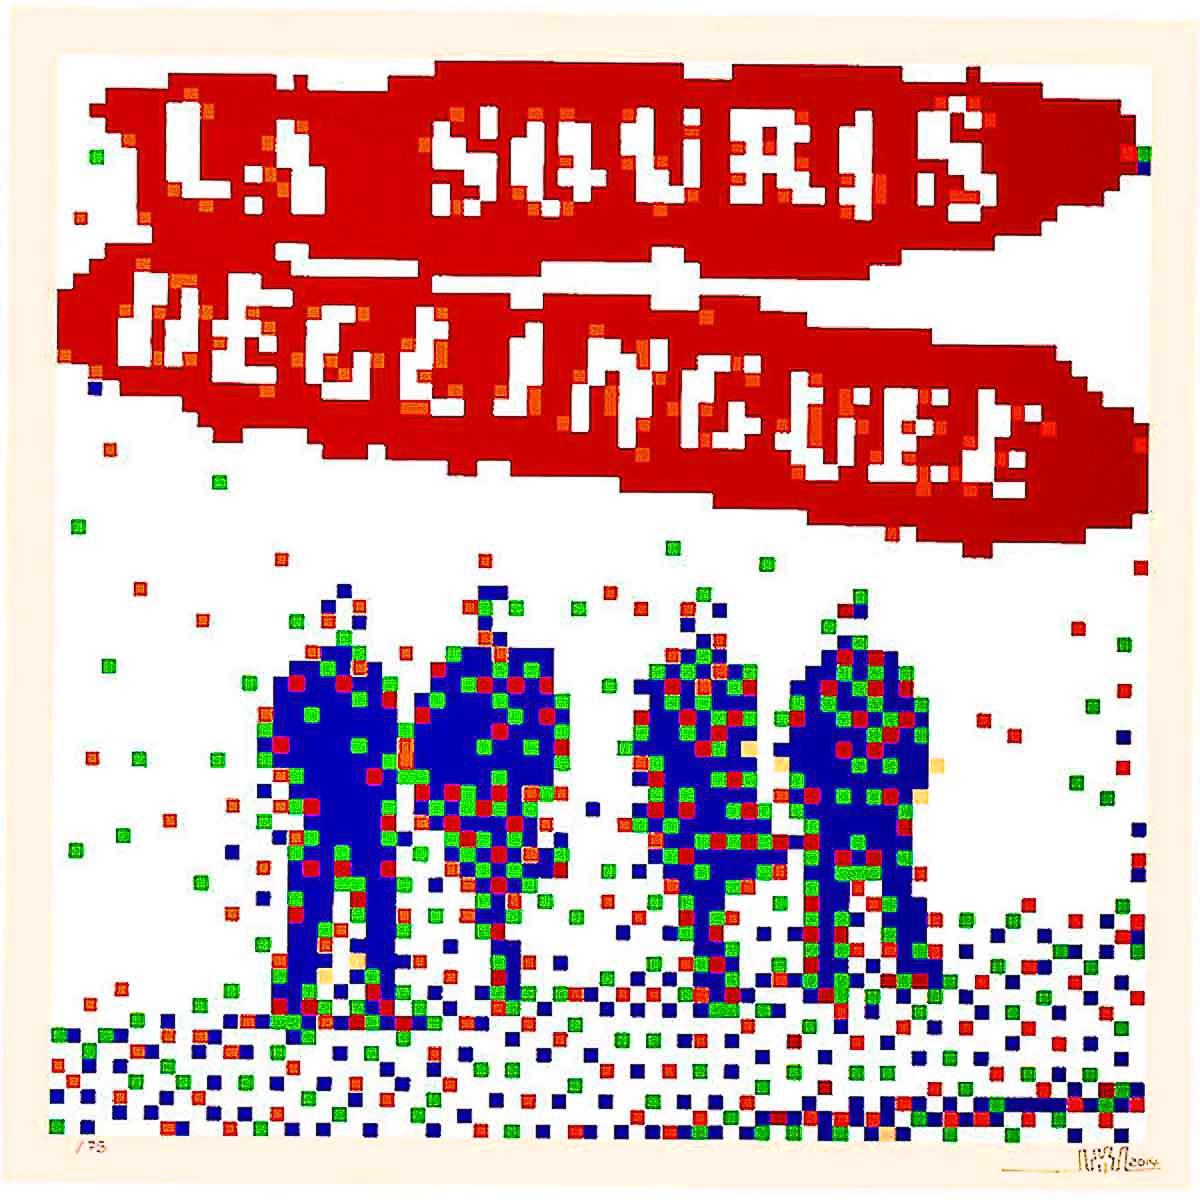 Hand signed and numbered by Invader.
Limited Edition of only 75.
Image was created by Invader for the cover art for the French band La Souris Deglinguee in 2014.
Print is sometimes referred to as "Les Toits Du Palace" as that is the name of the